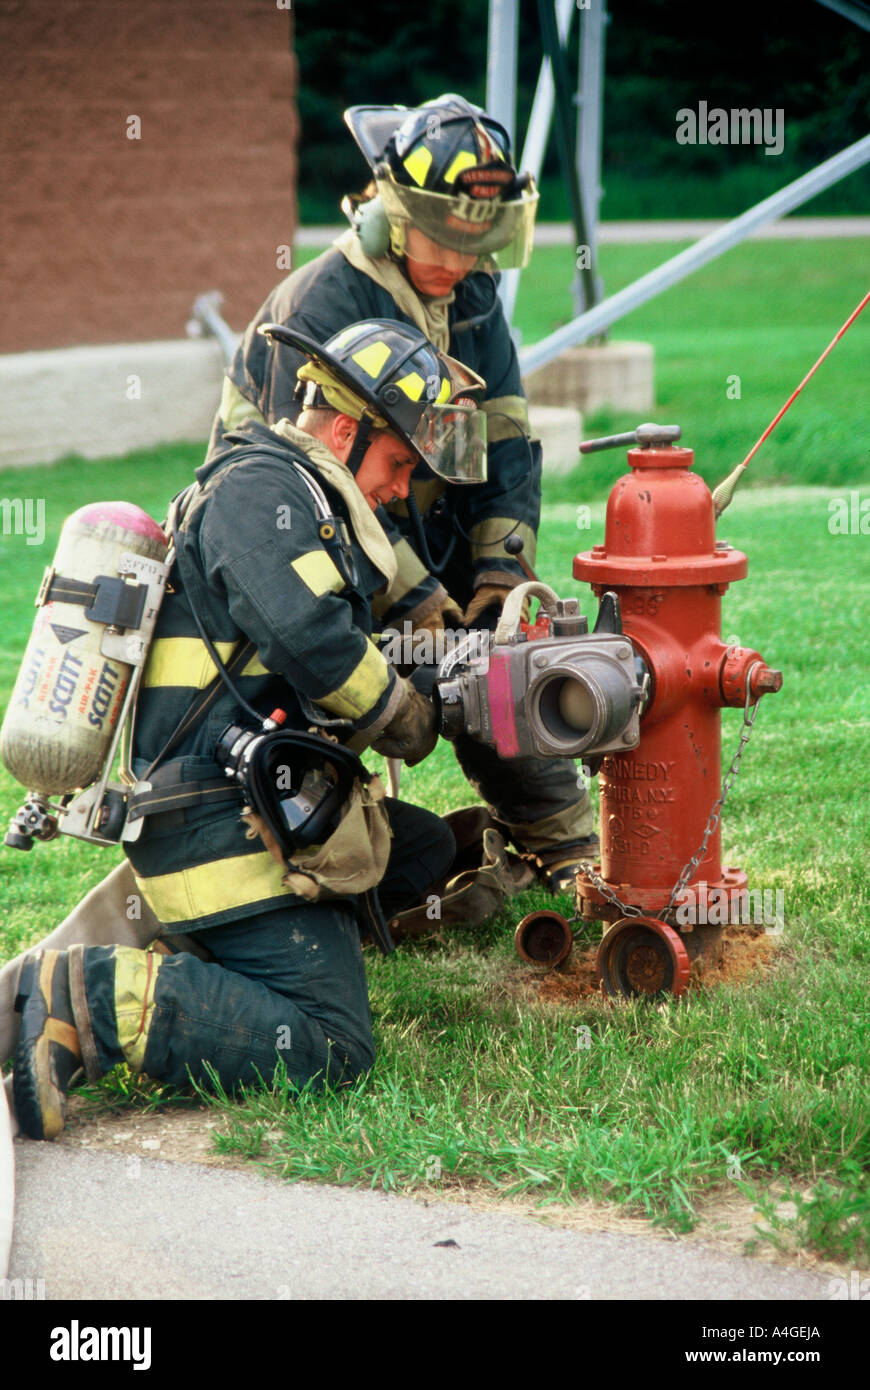 Two fire fighters putting a hose connection on a hydrant to deliver water to the pumper engine for a fire Stock Photo